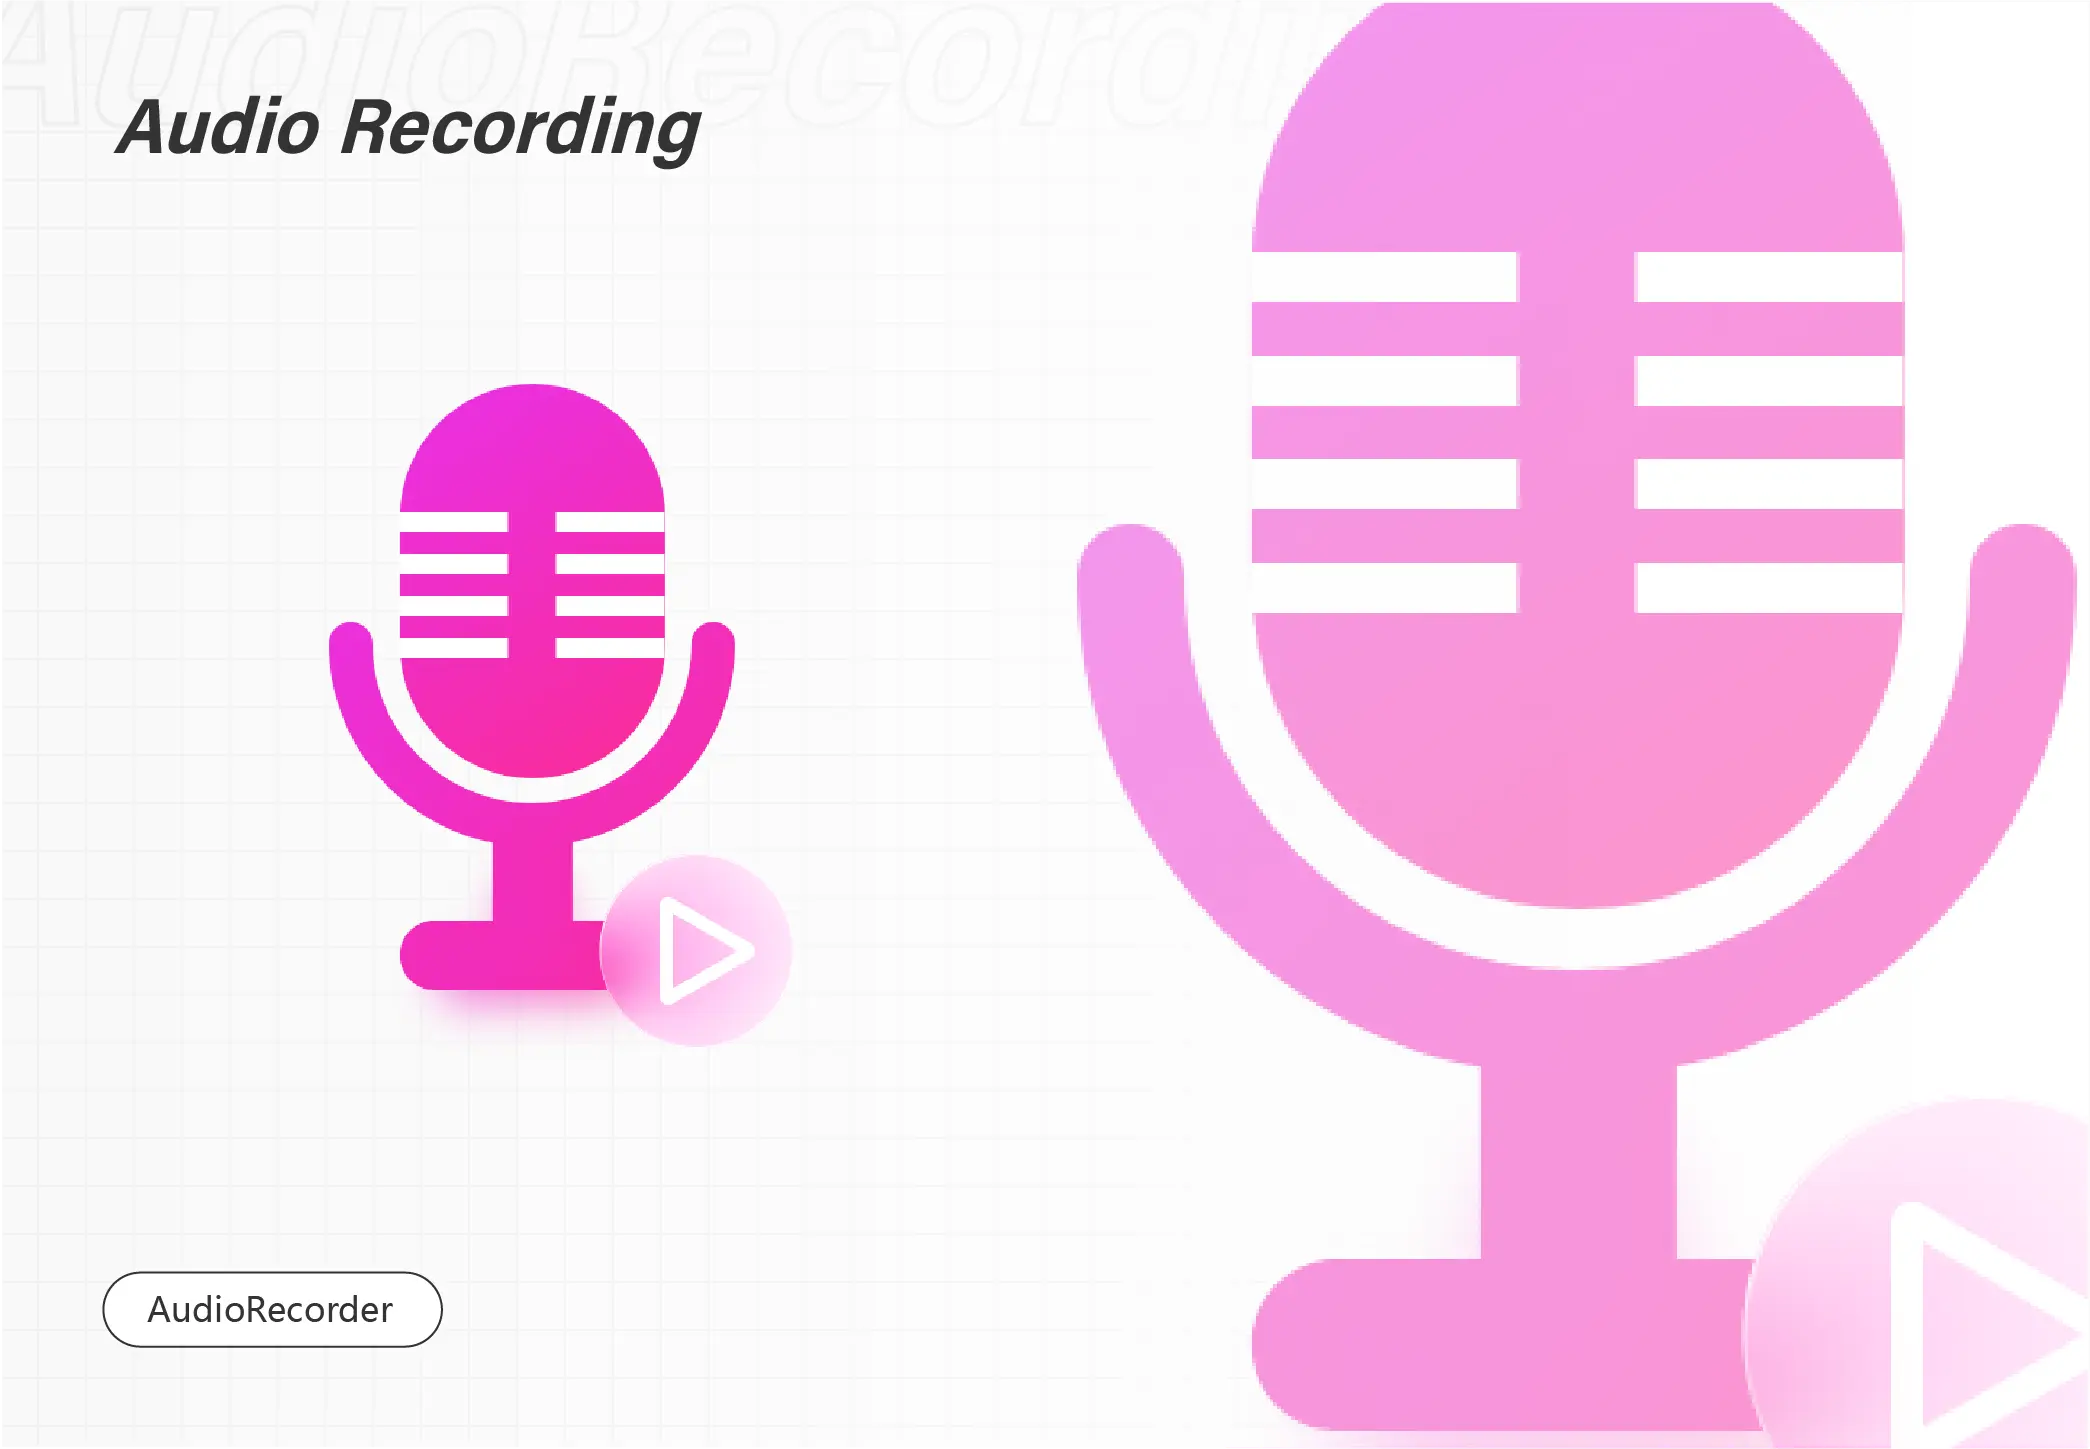 How to Record Audio on Windows in 2022